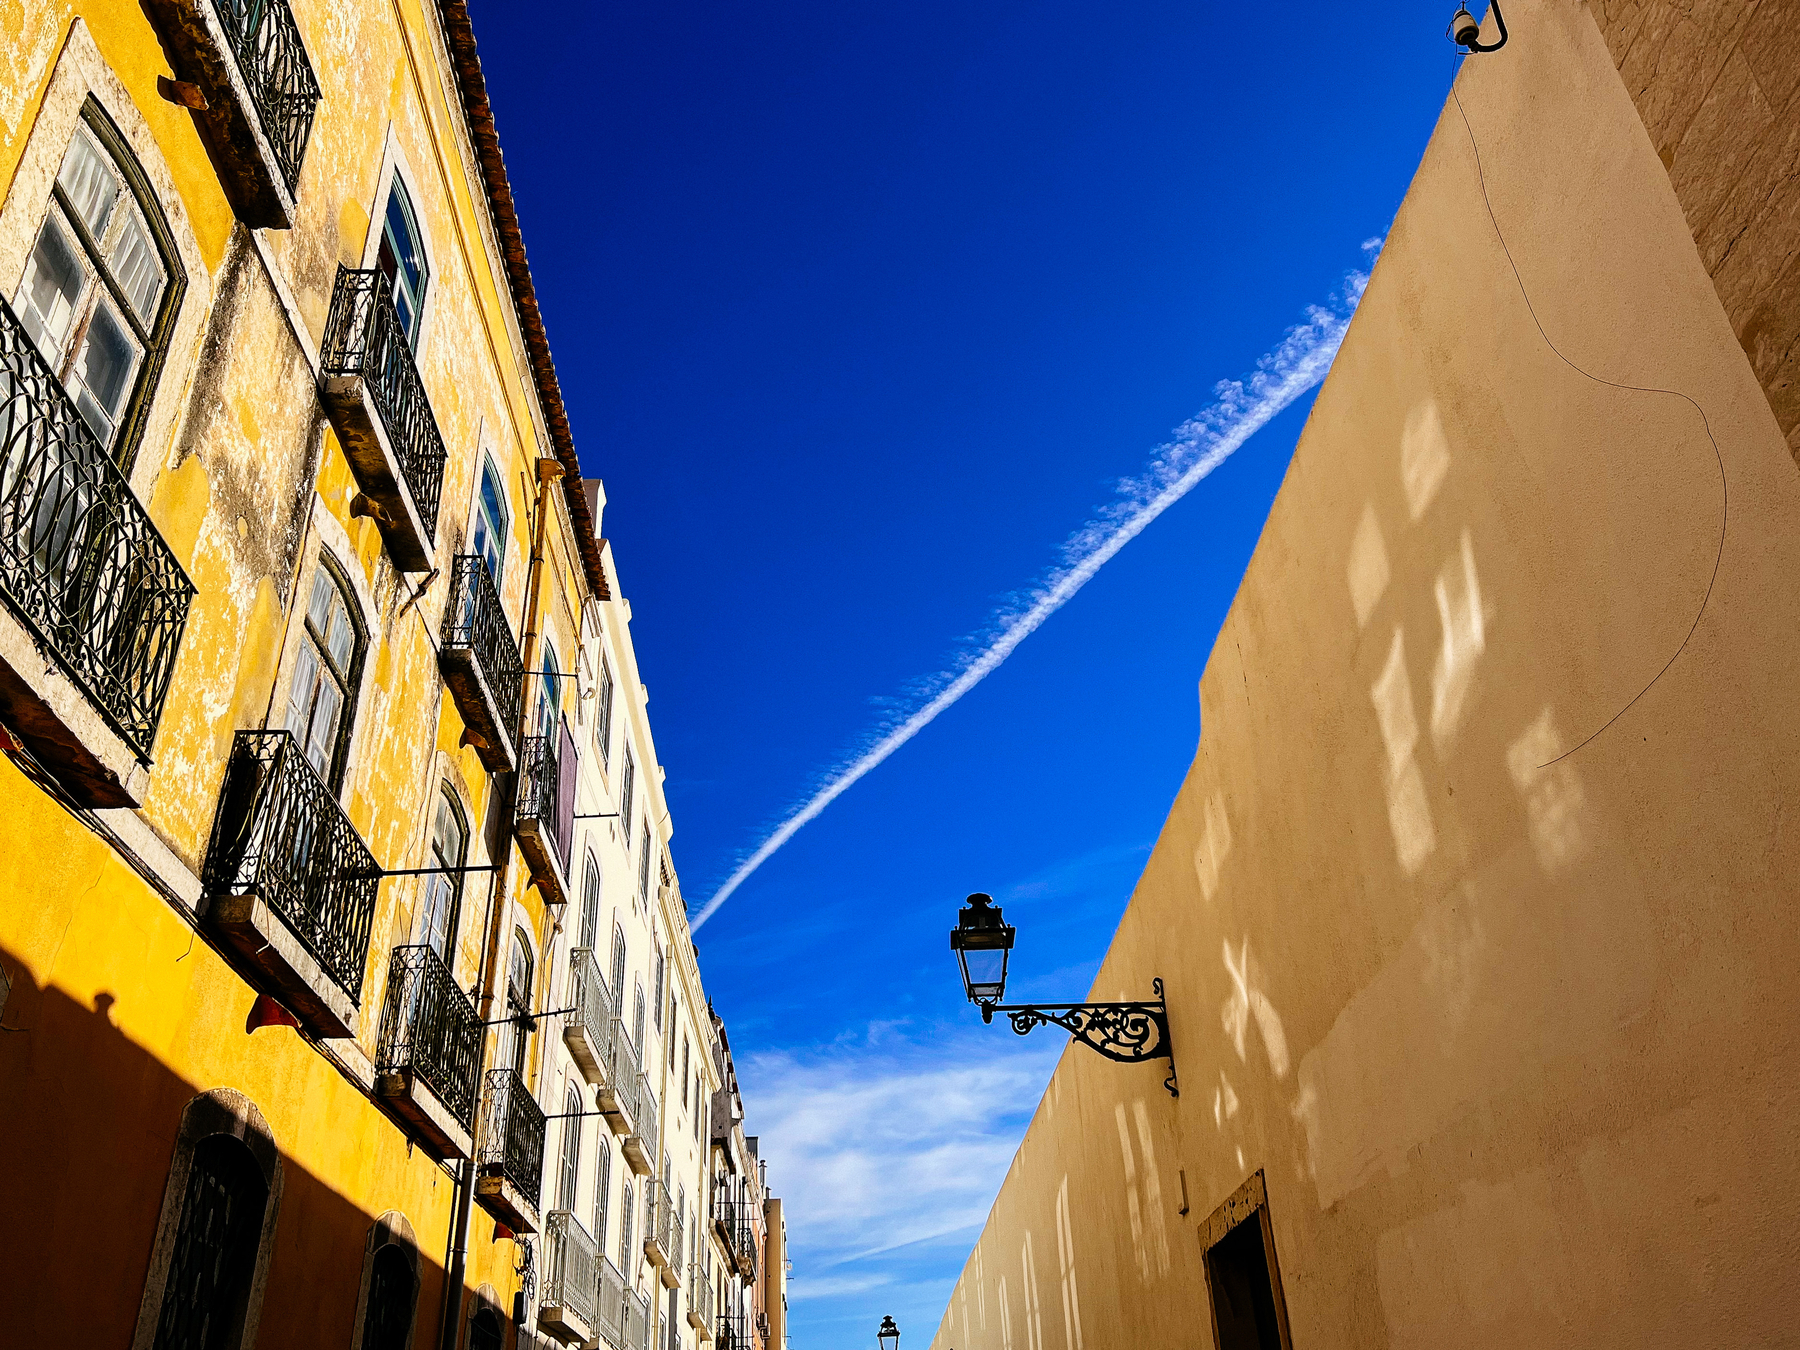 Looking up into the sky, the trailing cloud from an airplane crosses the sky, flanked by two buildings